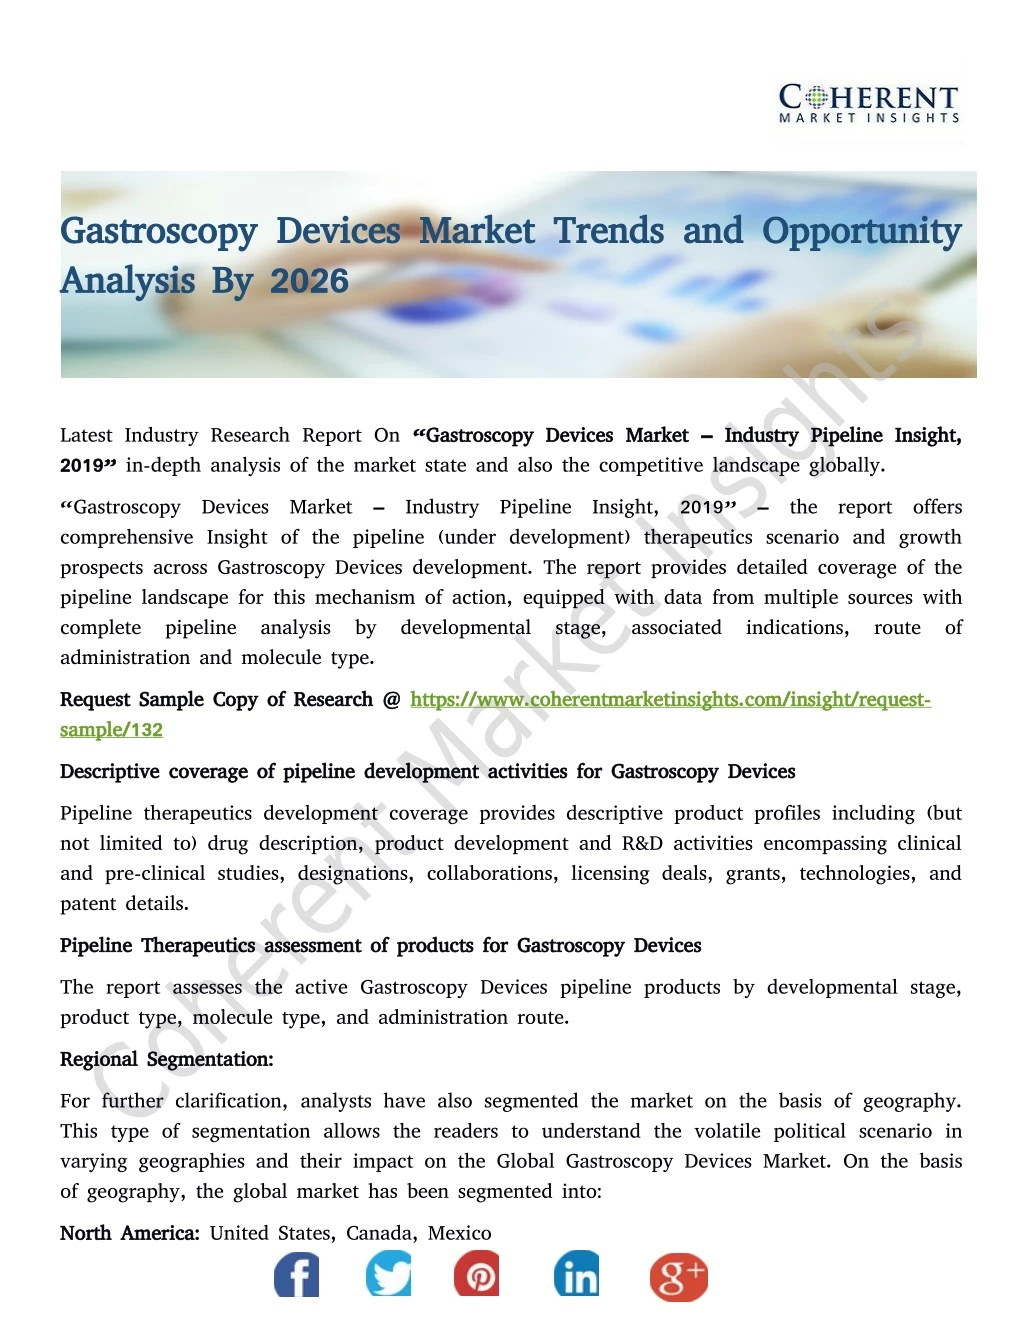 gastroscopy devices market trends and opportunity